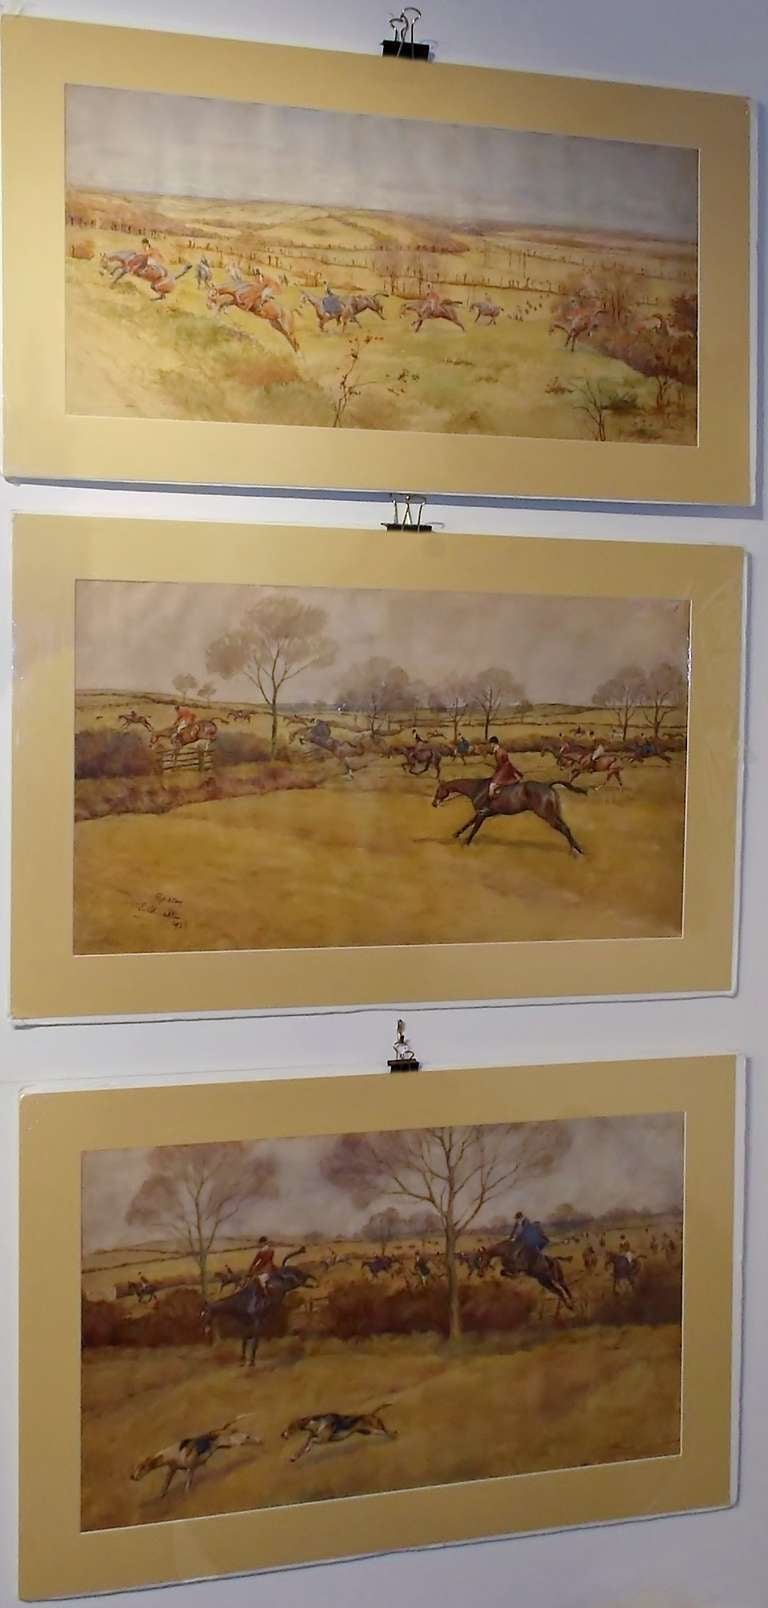 Set of 3 hunt scenes by E. Blocaille (20th c., France) depicting the English horse hunt organization 